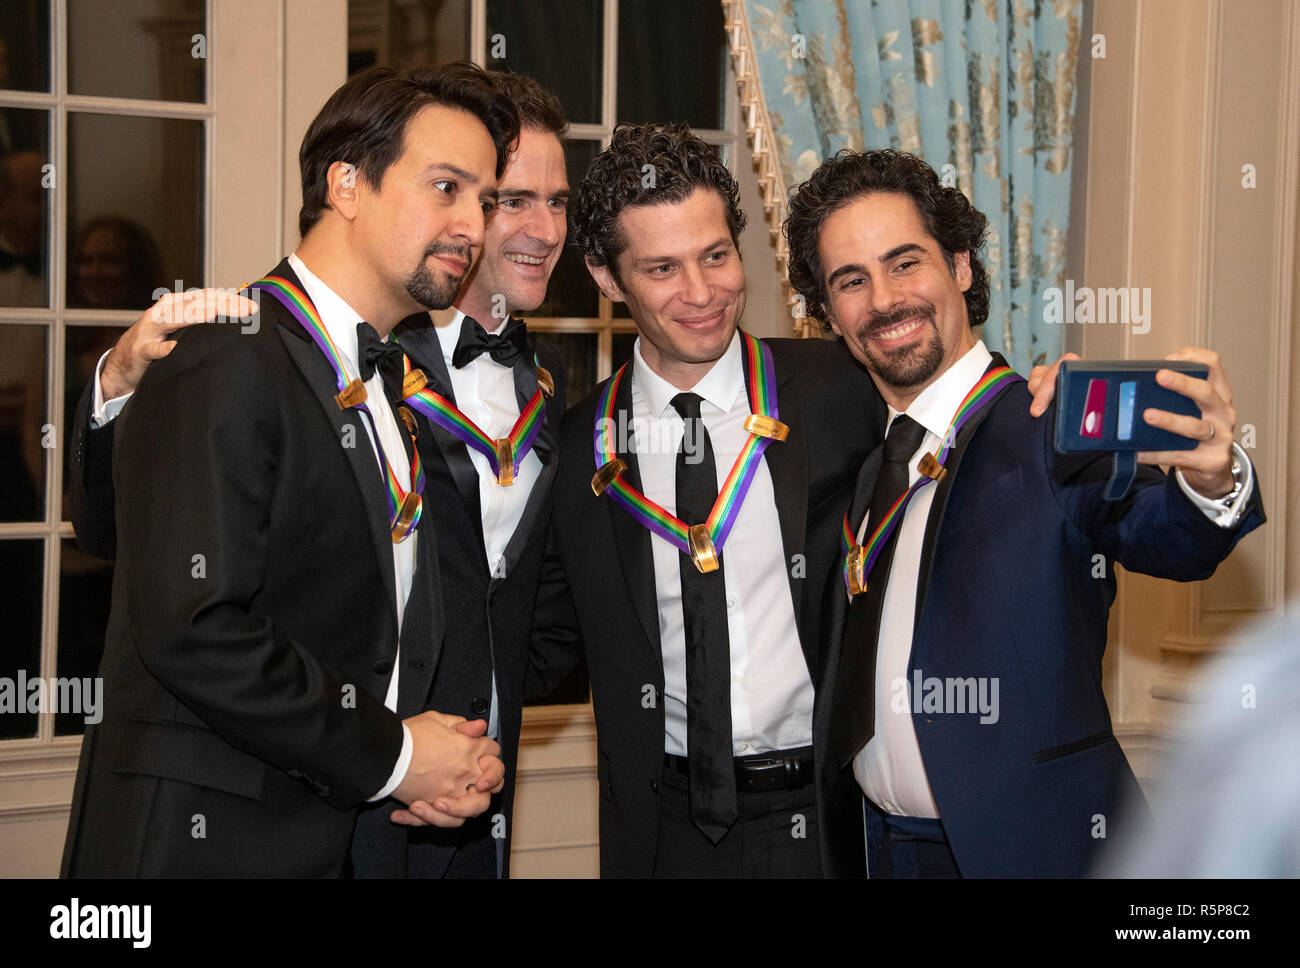 Hamilton co-creators Lin-manuel Miranda, Andy Blankenbuehler, Thomas Kail, and Alex Lacamoire, four of the recipients of the 41st Annual Kennedy Center Honors, pose for a selfie prior to sitting for a group photo following a dinner hosted by United States Deputy Secretary of State John J. Sullivan in their honor at the US Department of State in Washington, DC on Saturday, December 1, 2018. The 2018 honorees are: singer and actress Cher; composer and pianist Philip Glass; Country music entertainer Reba McEntire; and jazz saxophonist and composer Wayne Shorter. This year, the co-creators of H Stock Photo